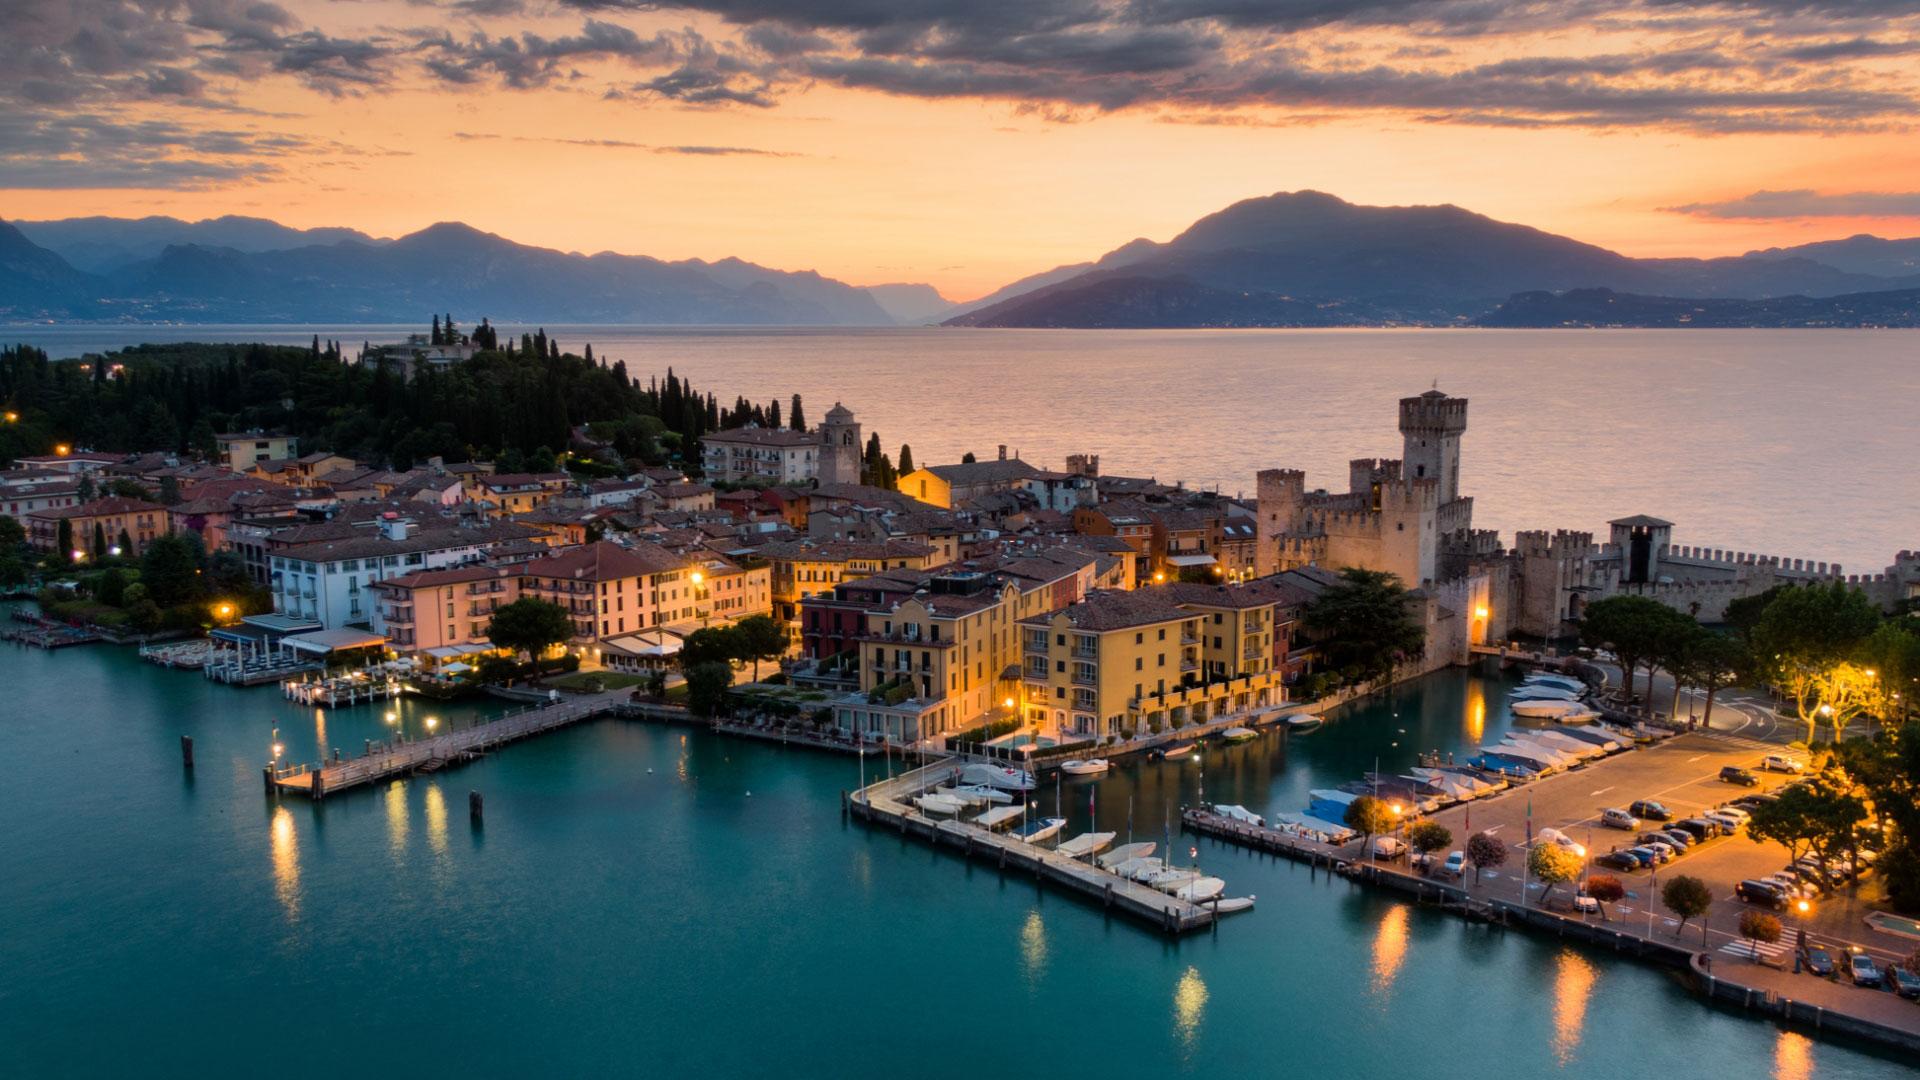 Panoramic view of Sirmione at sunset, with the castle and Lake Garda.